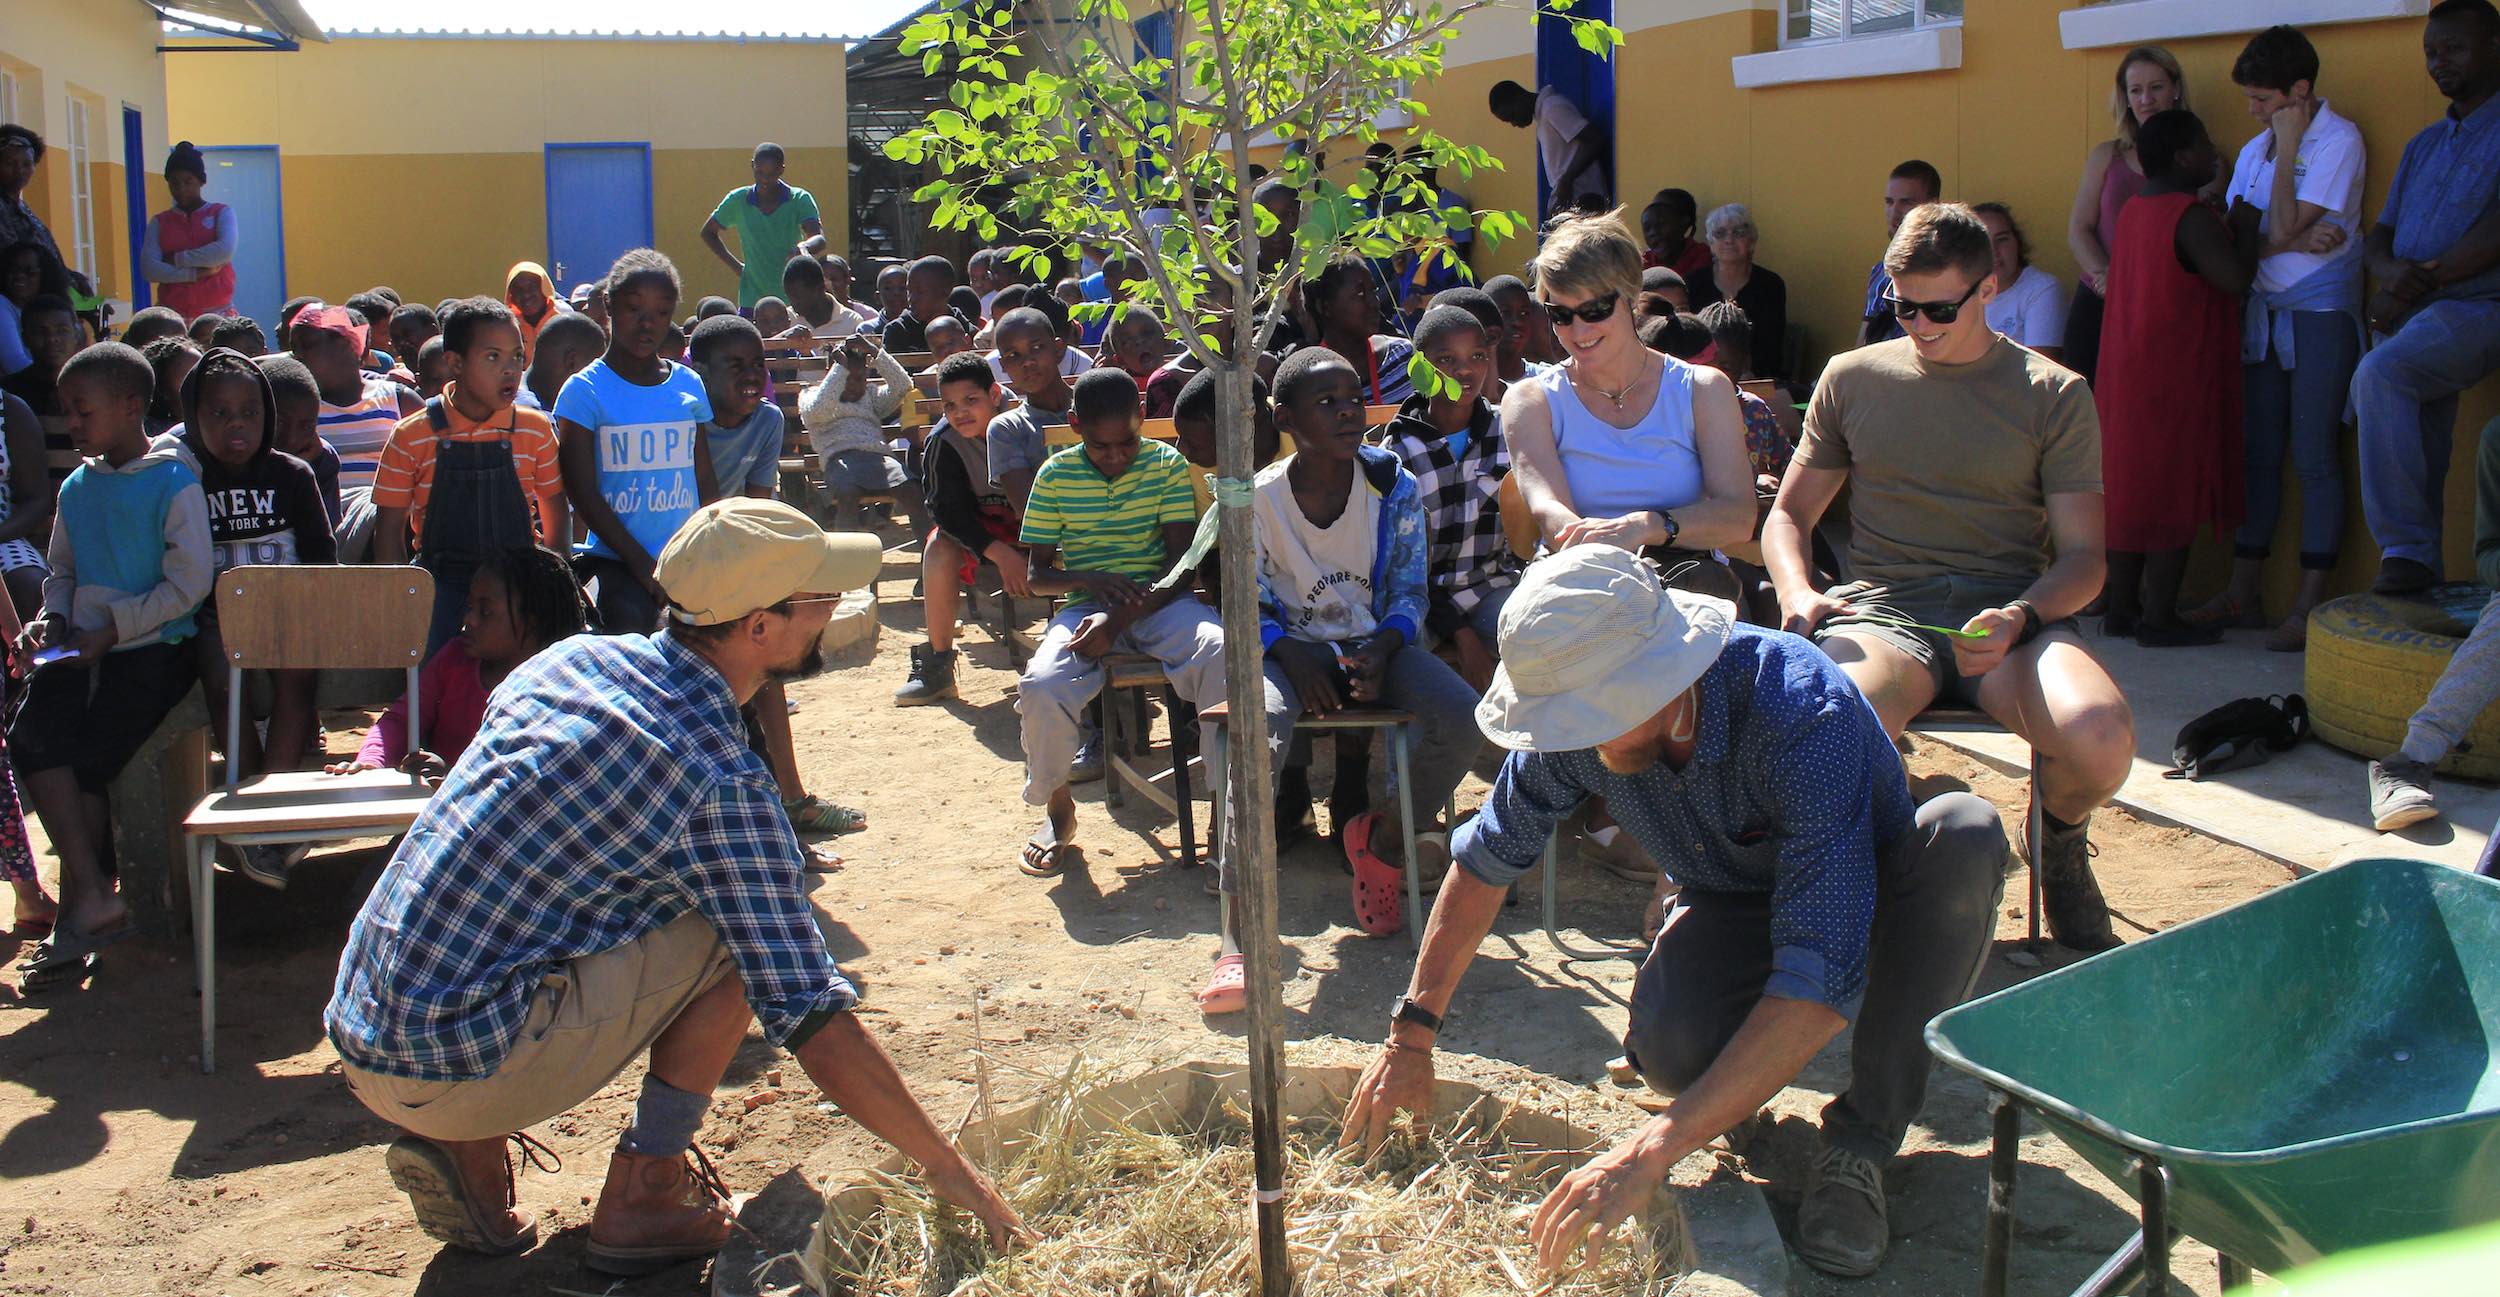 A tree is planted at a school, while the pupils look on.